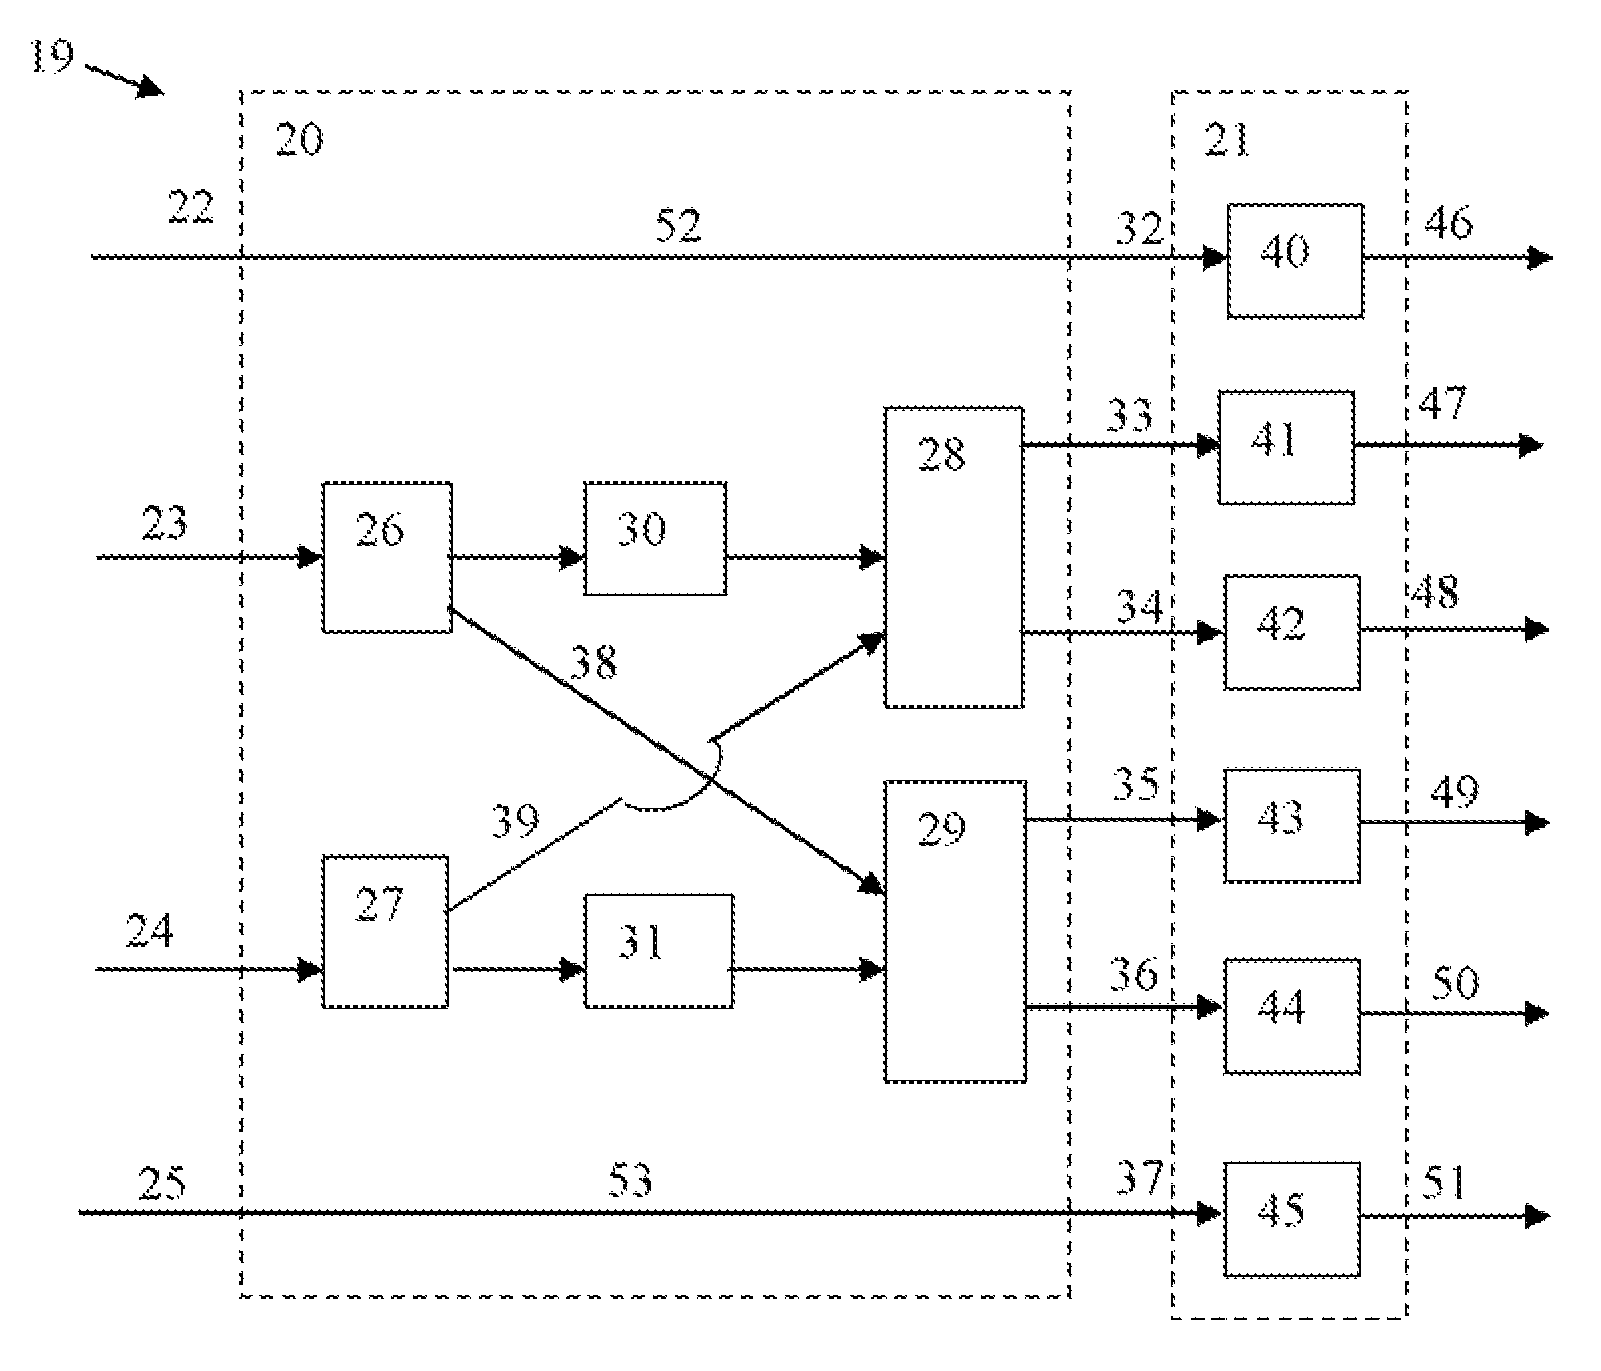 Integrated coherent optical detector